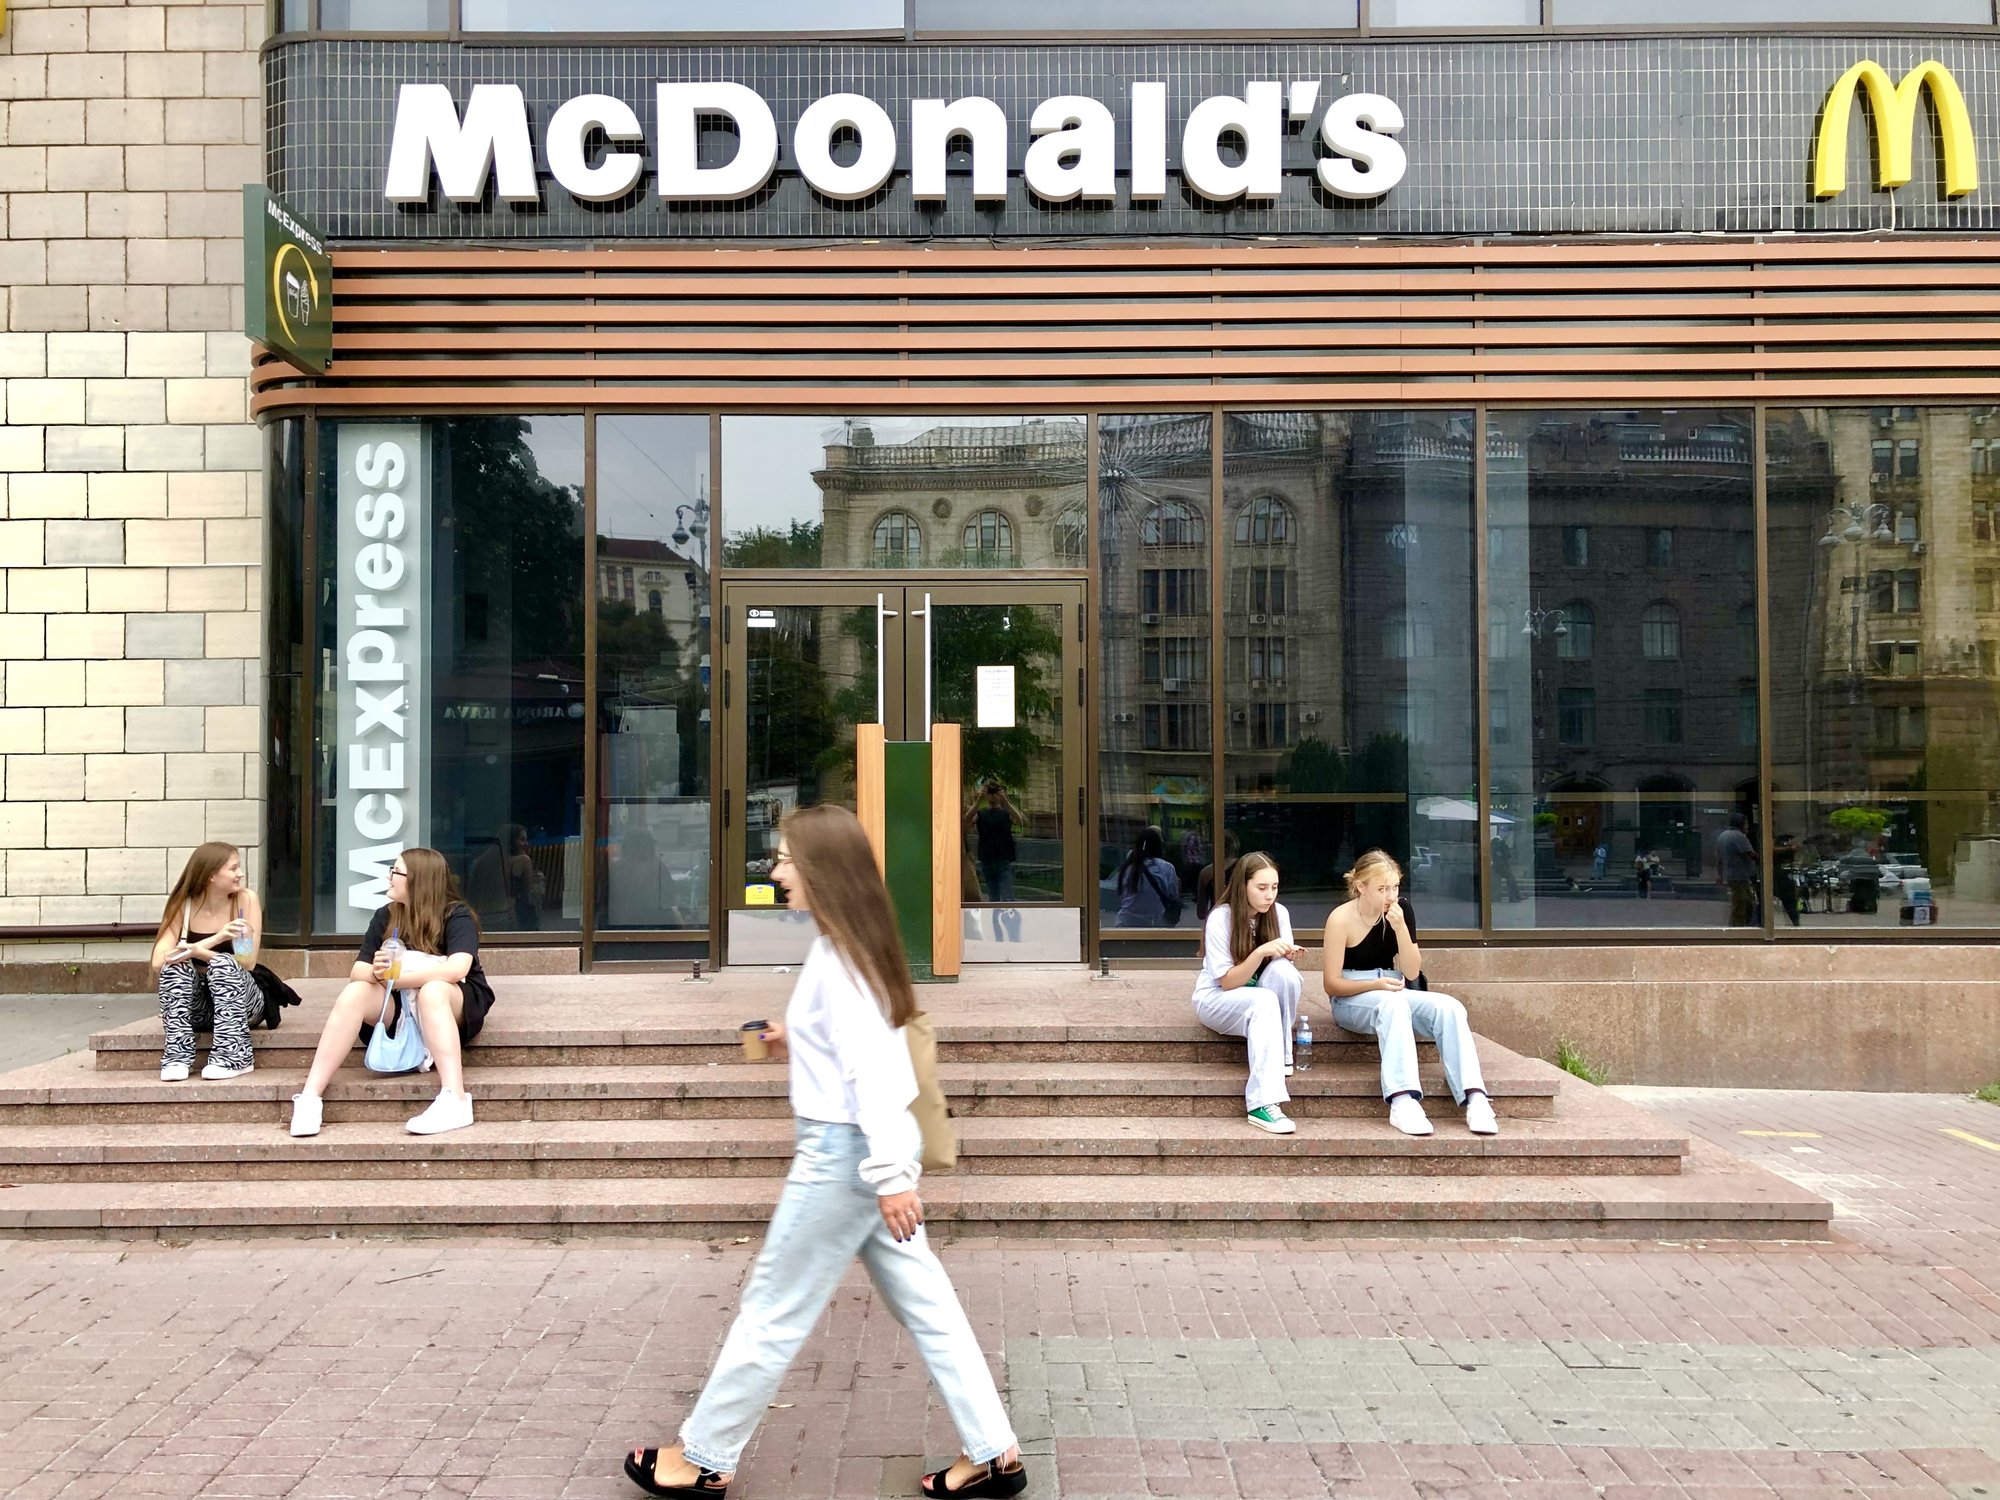 A McDonald’s restaurant in central Kyiv on Aug. 12, 2022, the day after the burger giant announced it was reopening some restaurants in Ukraine, which had been shut down after Russia’s full-scale war began. Photo by Nolan Peterson/Coffee or Die Magazine.